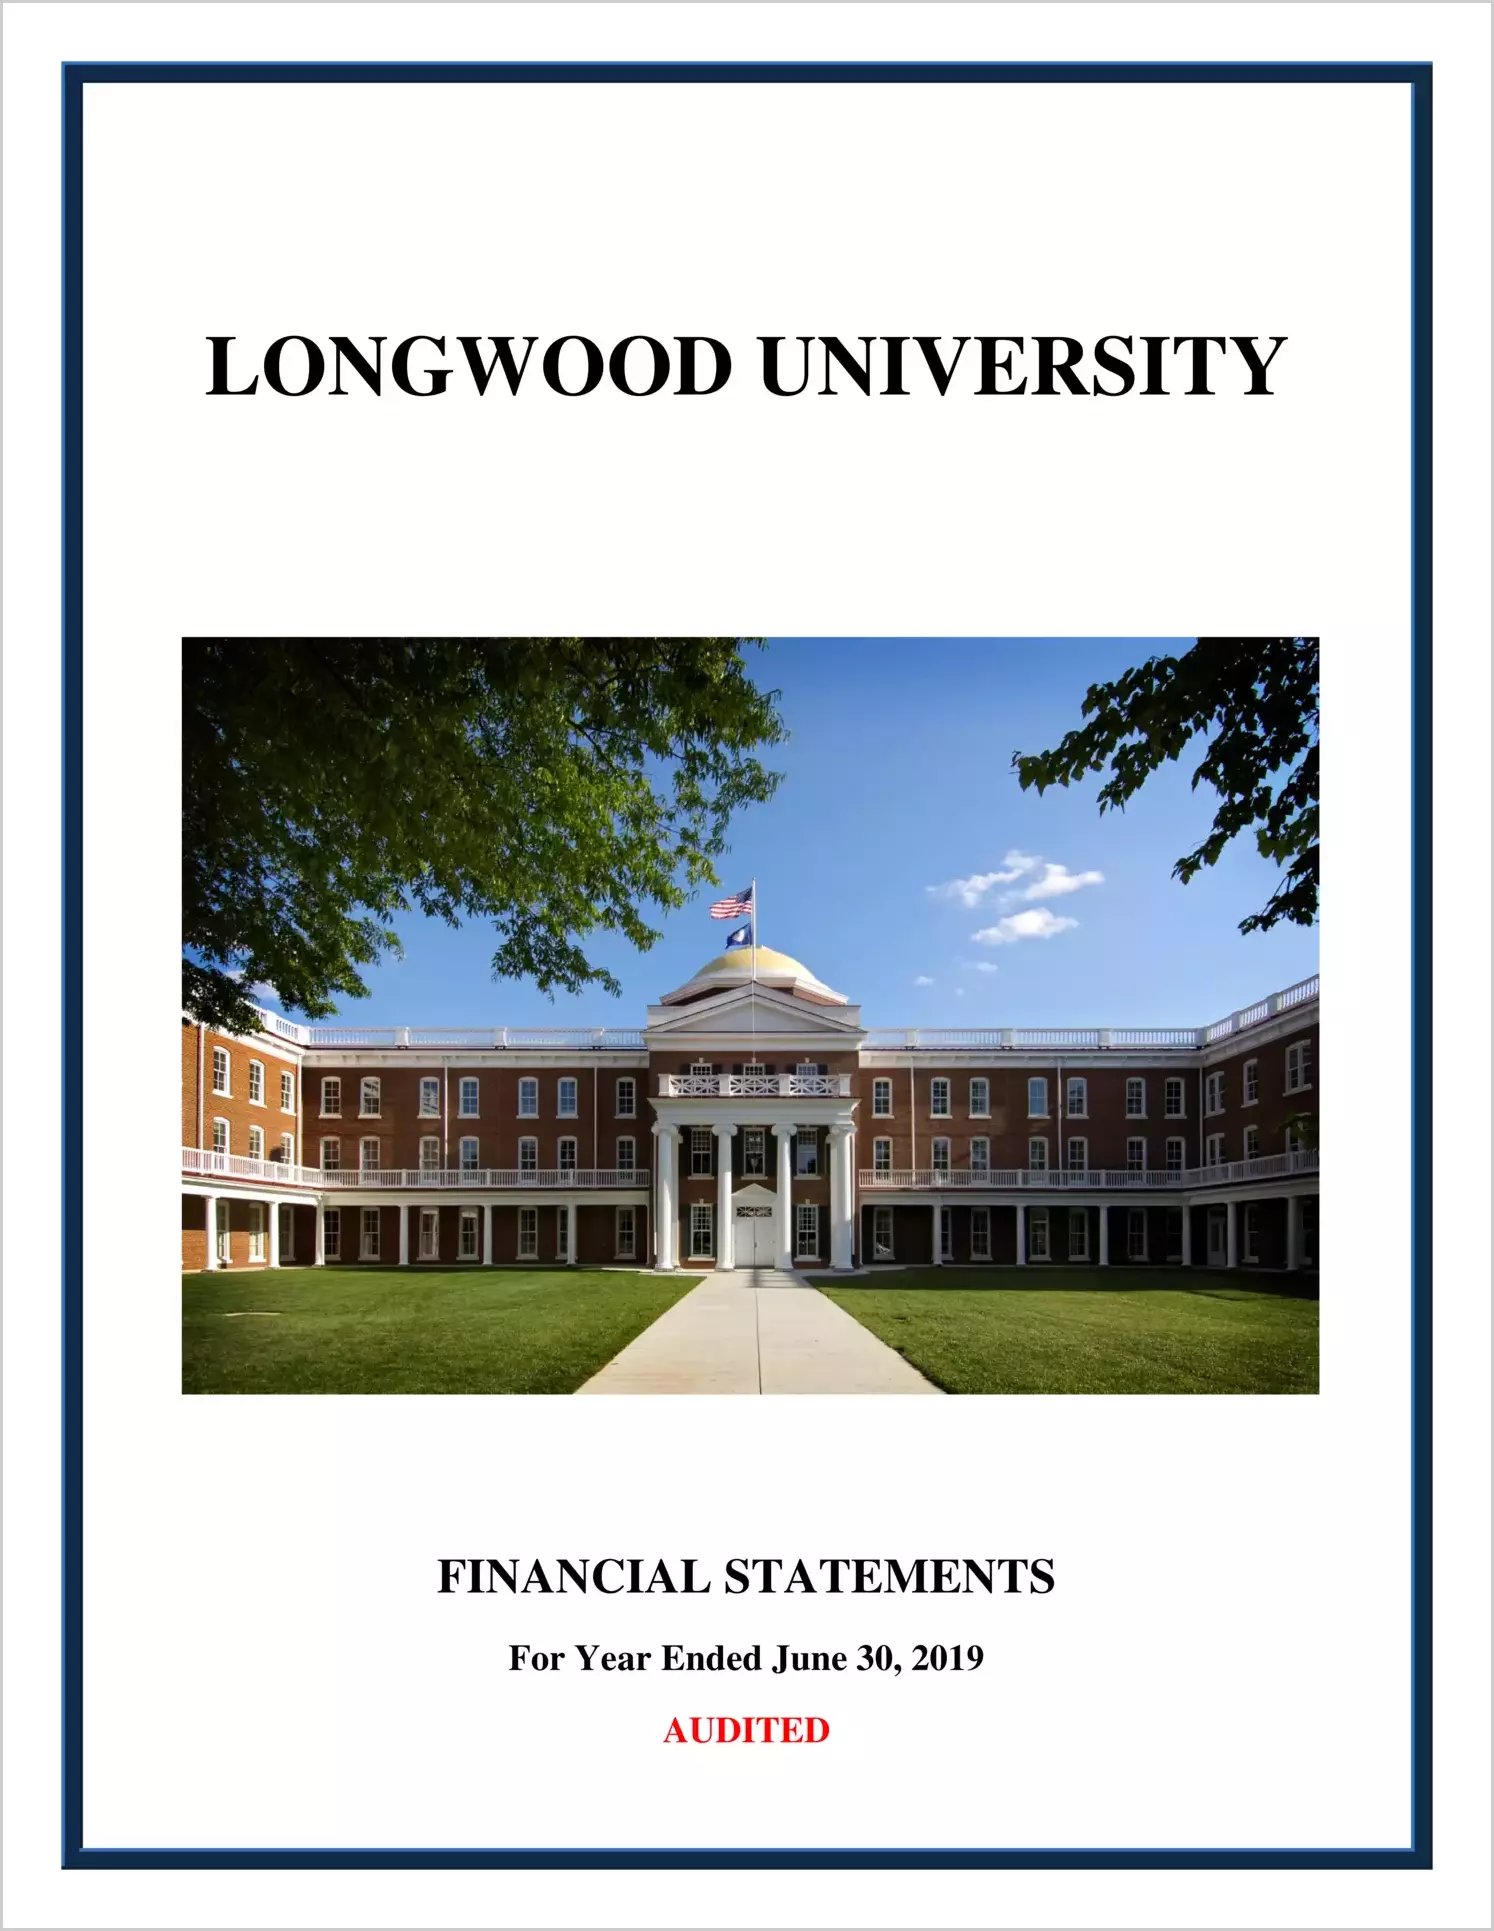 Longwood University Financial Statements for the year ended June 30, 2019